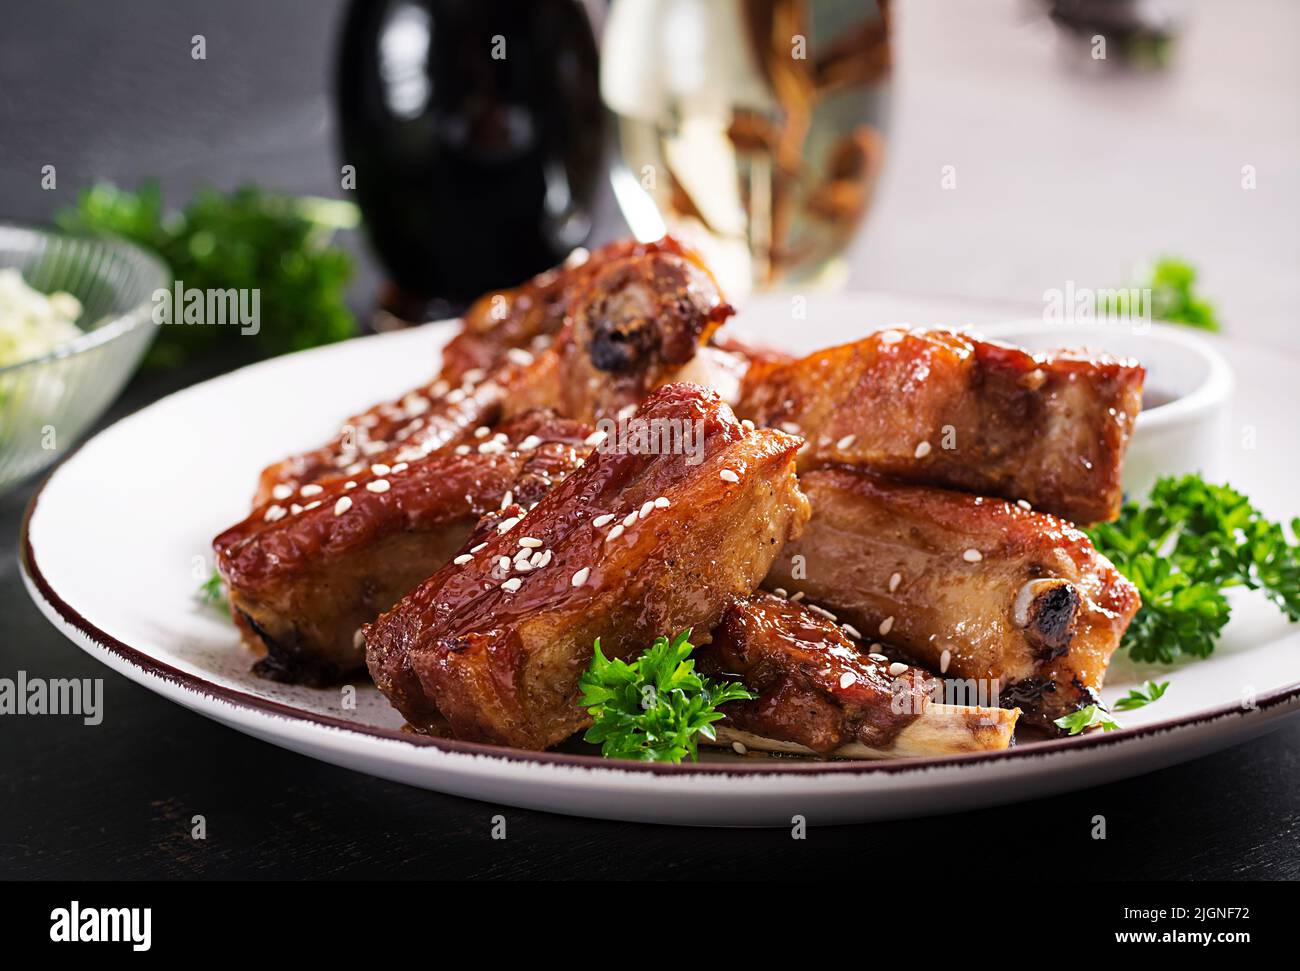 Delicious barbecued spare ribs on plate on dark background. Tasty bbq meat. Stock Photo